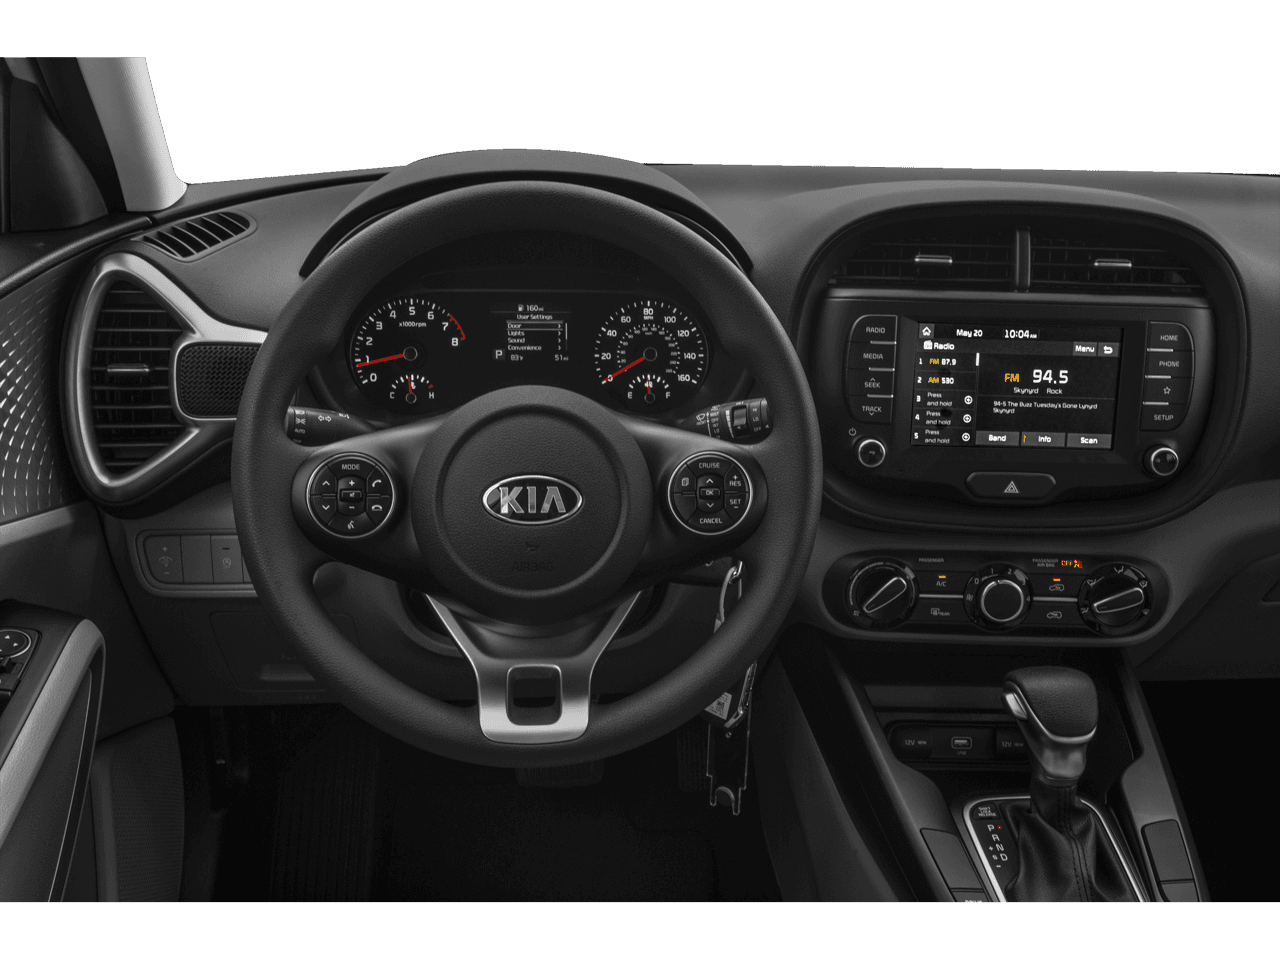 2021 Kia Soul Photo in Wooster, OH 44691